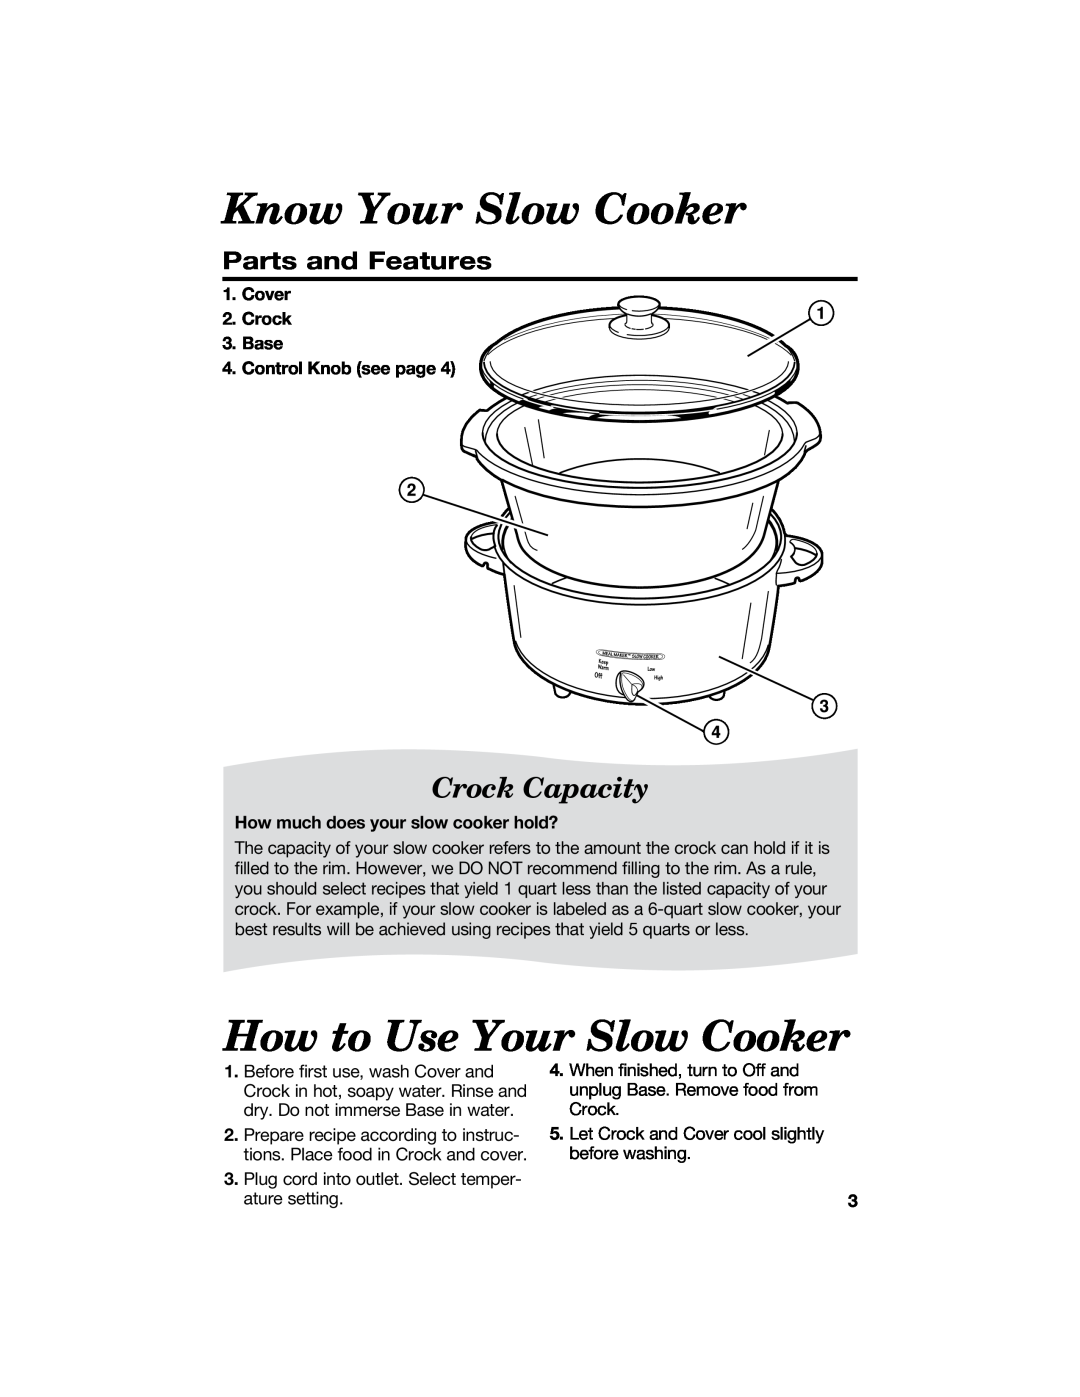 Hamilton Beach 840084500 manual Know Your Slow Cooker, How to Use Your Slow Cooker, Parts and Features, Crock Capacity 